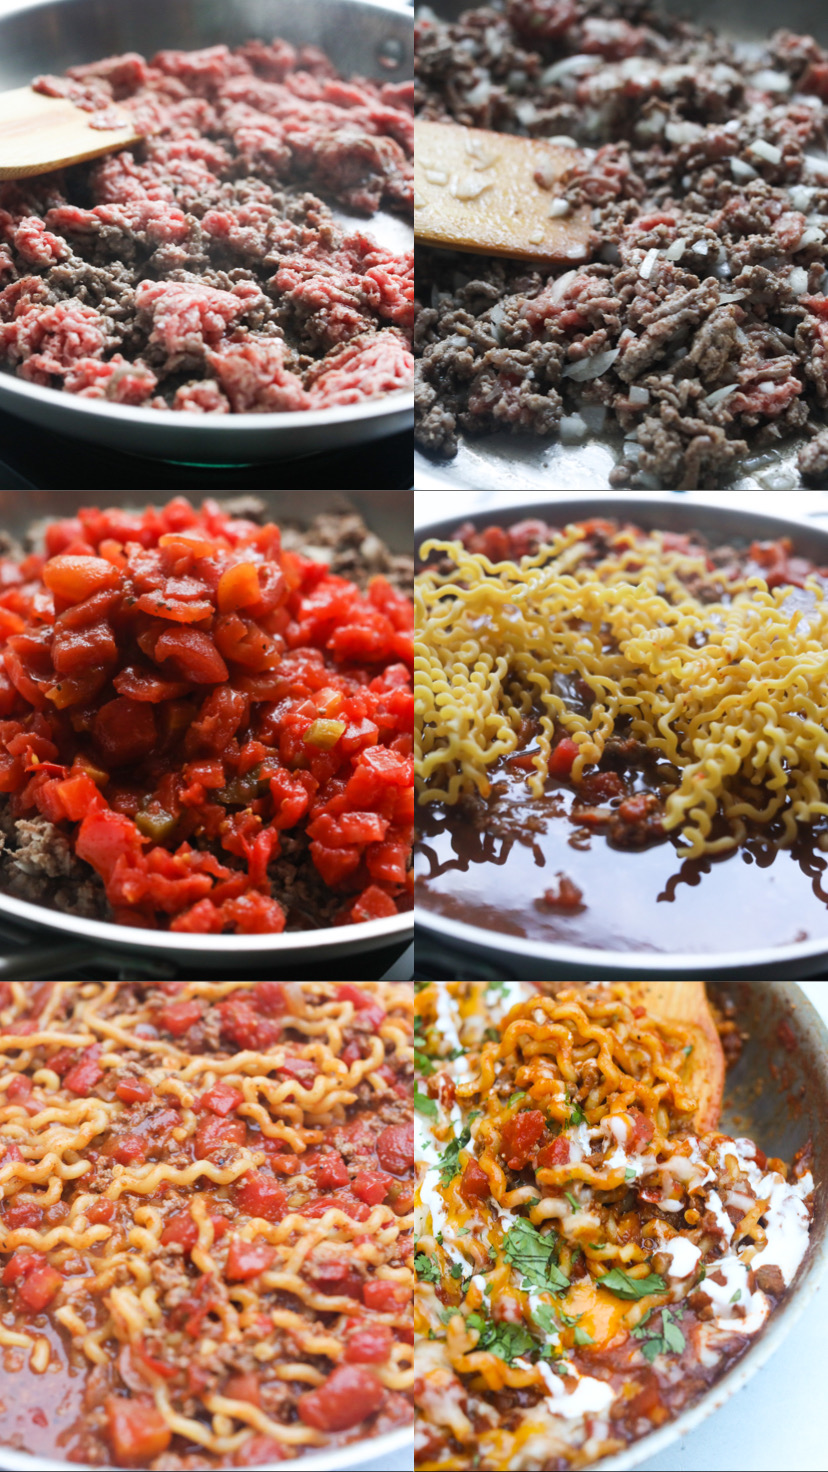 Taco spaghetti process shots with six images in a collage. Images begin with just ground beef and onion, tomatoes, pasta, stock, noodles and toppings are added to show cooking progression of recipe.